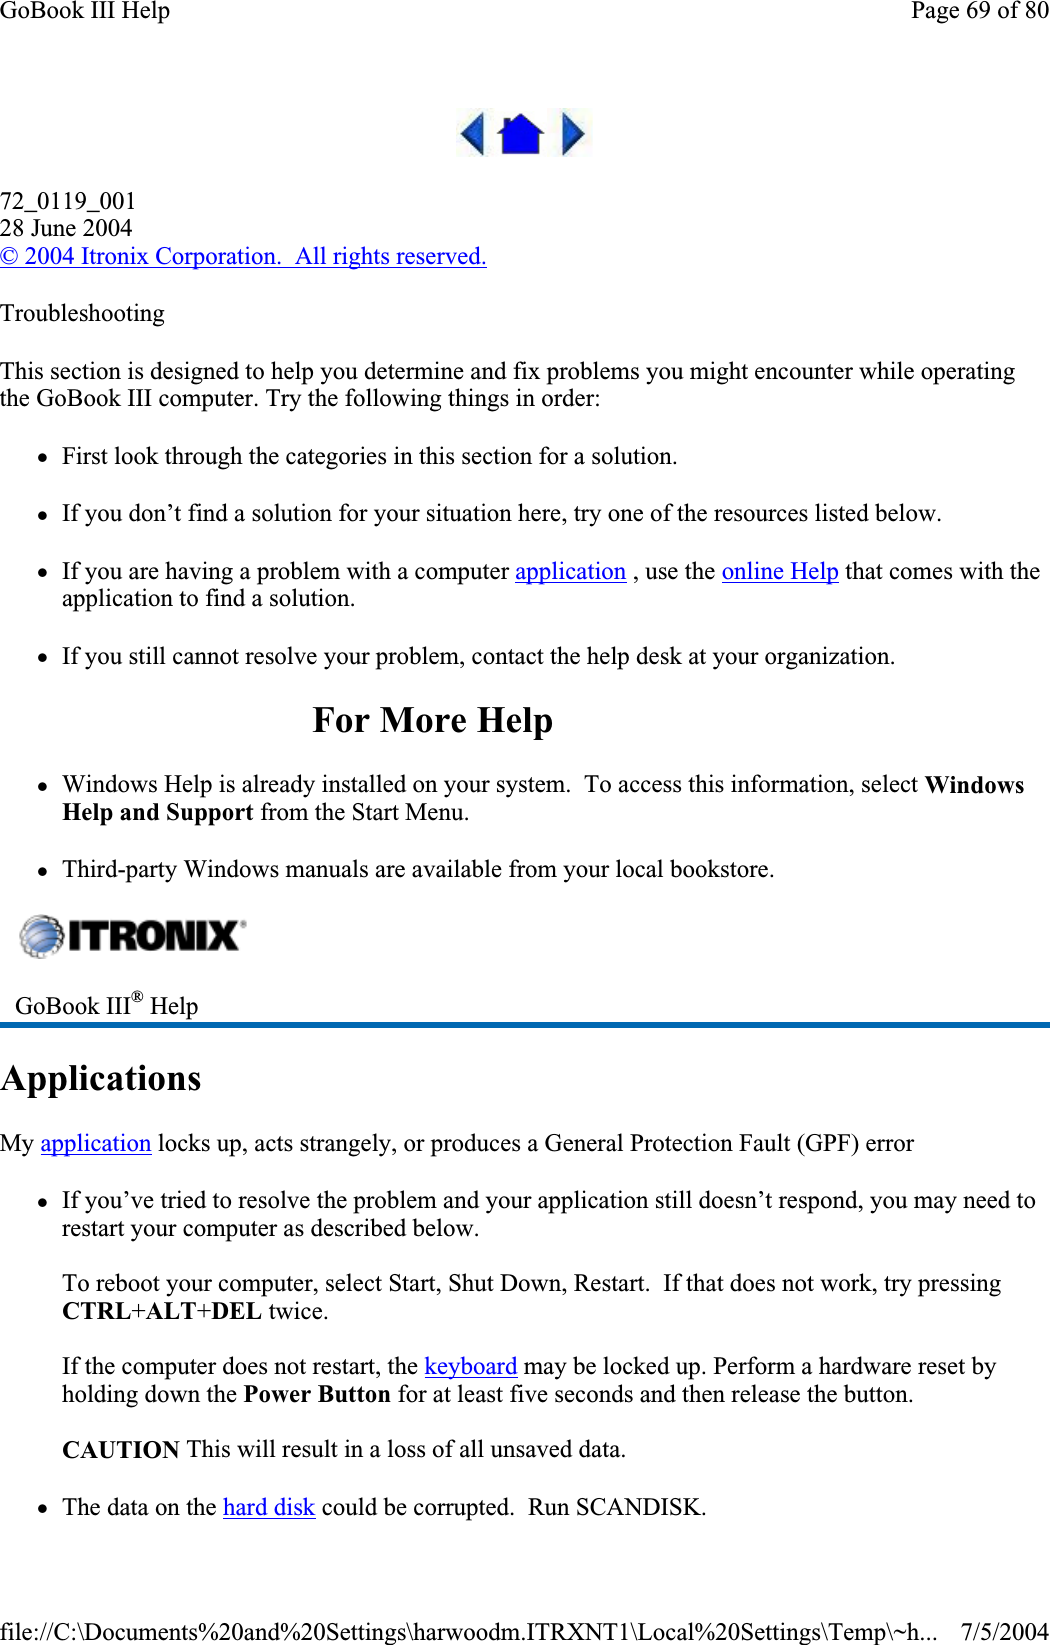 72_0119_00128 June 2004©2004 Itronix Corporation.  All rights reserved.TroubleshootingThis section is designed to help you determine and fix problems you might encounter while operating the GoBook III computer. Try the following things in order:zFirst look through the categories in this section for a solution.zIf you don’t find a solution for your situation here, try one of the resources listed below. zIf you are having a problem with a computer application , use the online Help that comes with the application to find a solution. zIf you still cannot resolve your problem, contact the help desk at your organization. For More Help zWindows Help is already installed on your system.  To access this information, select WindowsHelp and Support from the Start Menu. zThird-party Windows manuals are available from your local bookstore. ApplicationsMy application locks up, acts strangely, or produces a General Protection Fault (GPF) error zIf you’ve tried to resolve the problem and your application still doesn’t respond, you may need to restart your computer as described below.To reboot your computer, select Start, Shut Down, Restart.  If that does not work, try pressing CTRL+ALT+DEL twice. If the computer does not restart, the keyboard may be locked up. Perform a hardware reset by holding down the Power Button for at least five seconds and then release the button.CAUTION This will result in a loss of all unsaved data. zThe data on the hard disk could be corrupted. Run SCANDISK.GoBook III® HelpPage 69 of 80GoBook III Help7/5/2004file://C:\Documents%20and%20Settings\harwoodm.ITRXNT1\Local%20Settings\Temp\~h...